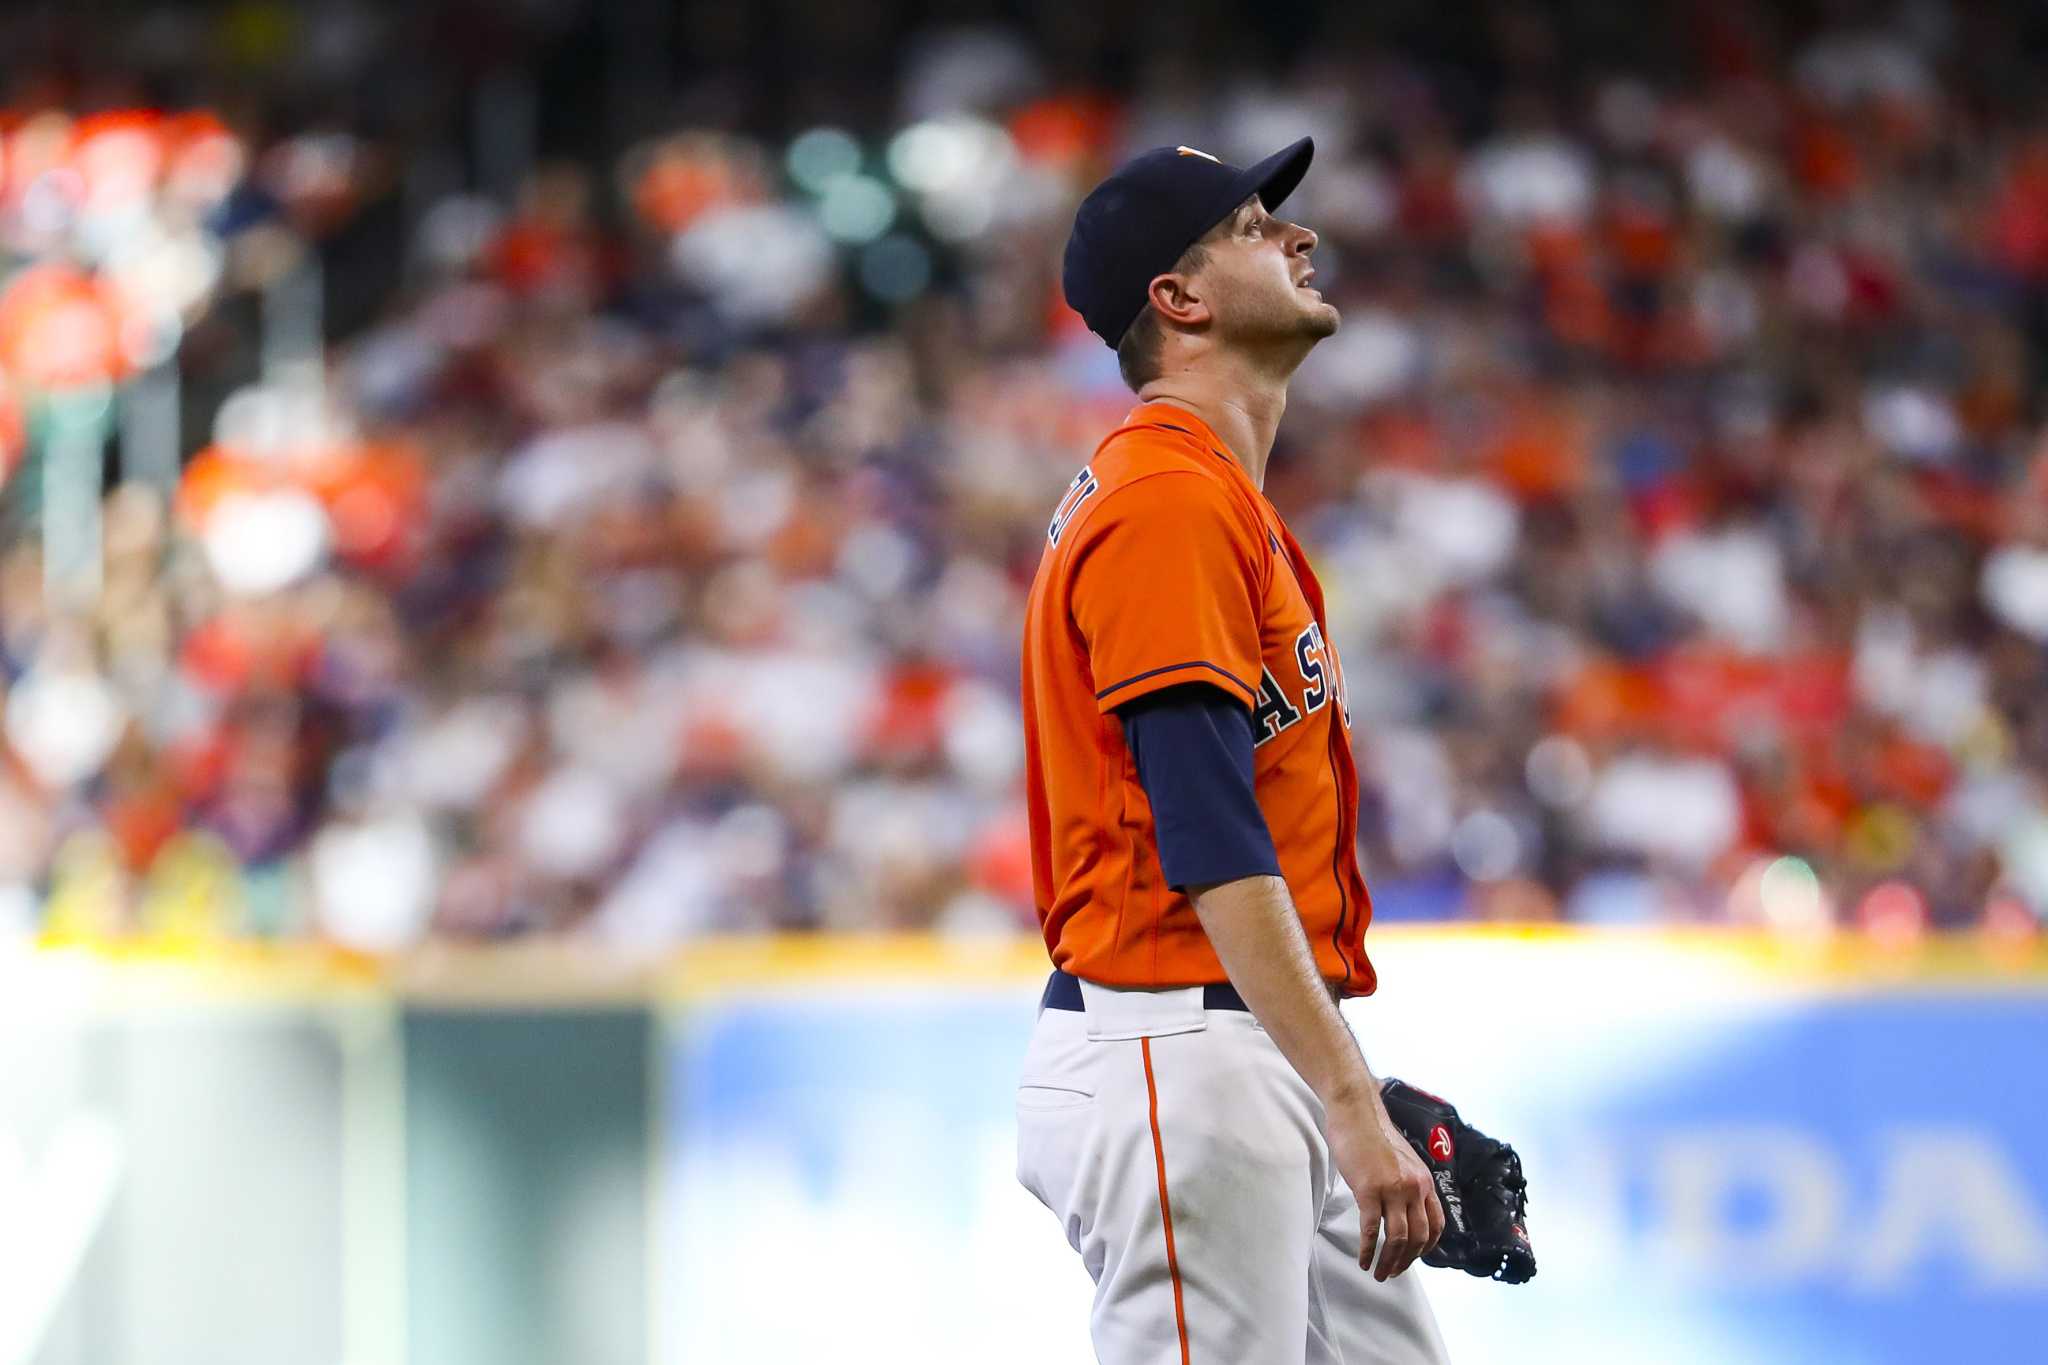 Jake Odorizzi 'sucked up' four critical innings for Astros